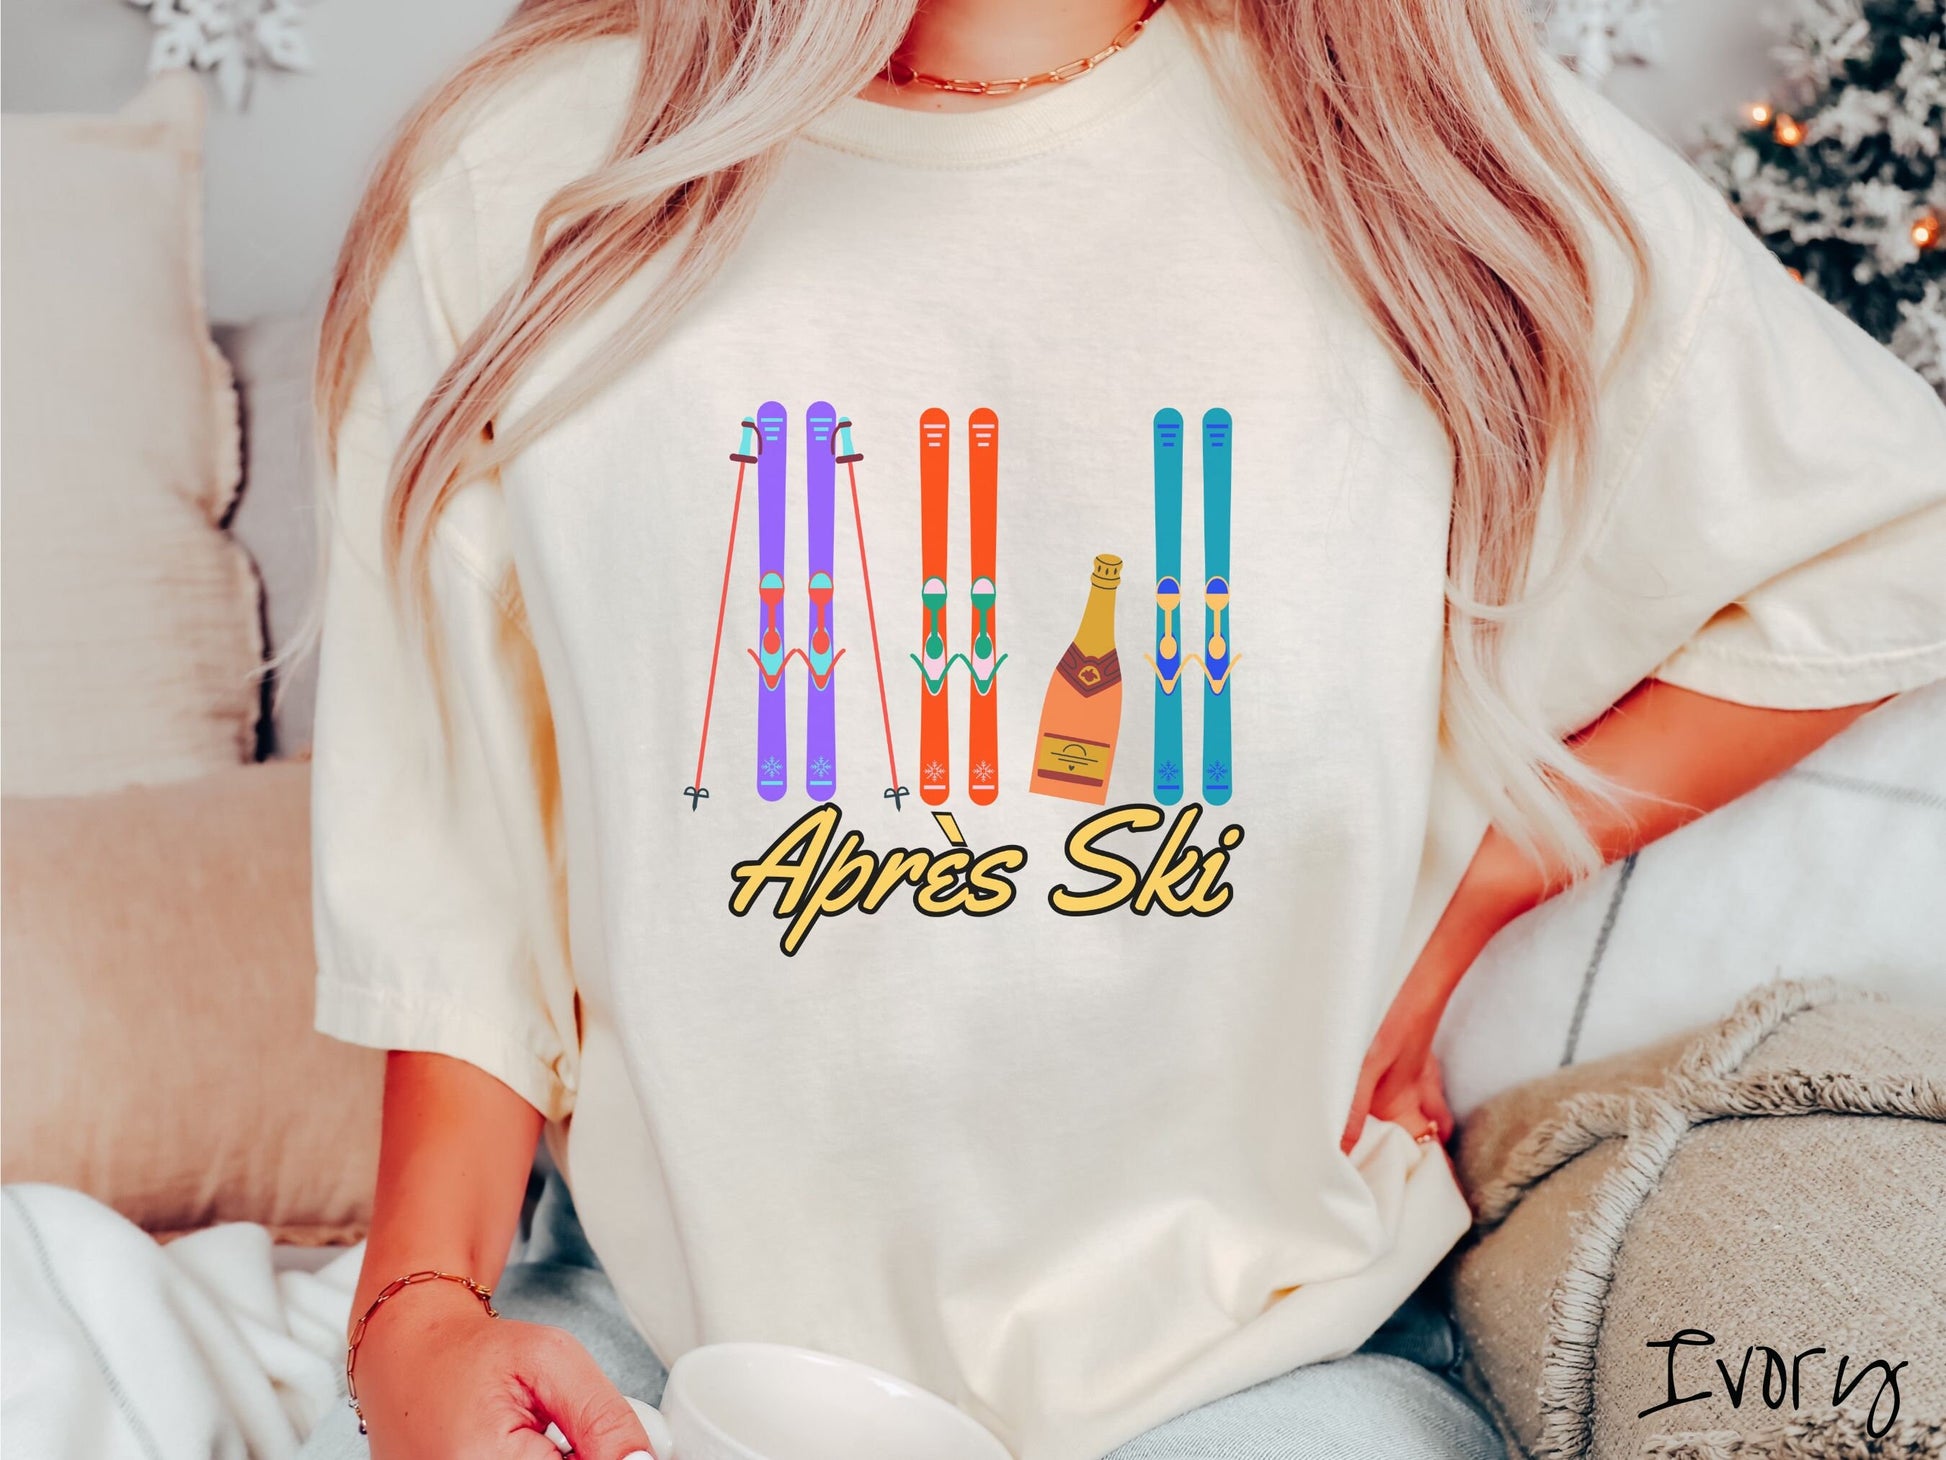 A woman wearing a vintage, ivory colored shirt with sets of purple, orange, and turquoise snow skis standing upright, and a big bottle of champagne next to them. Below the skis is the text Apres Ski which is French for After Skiing.